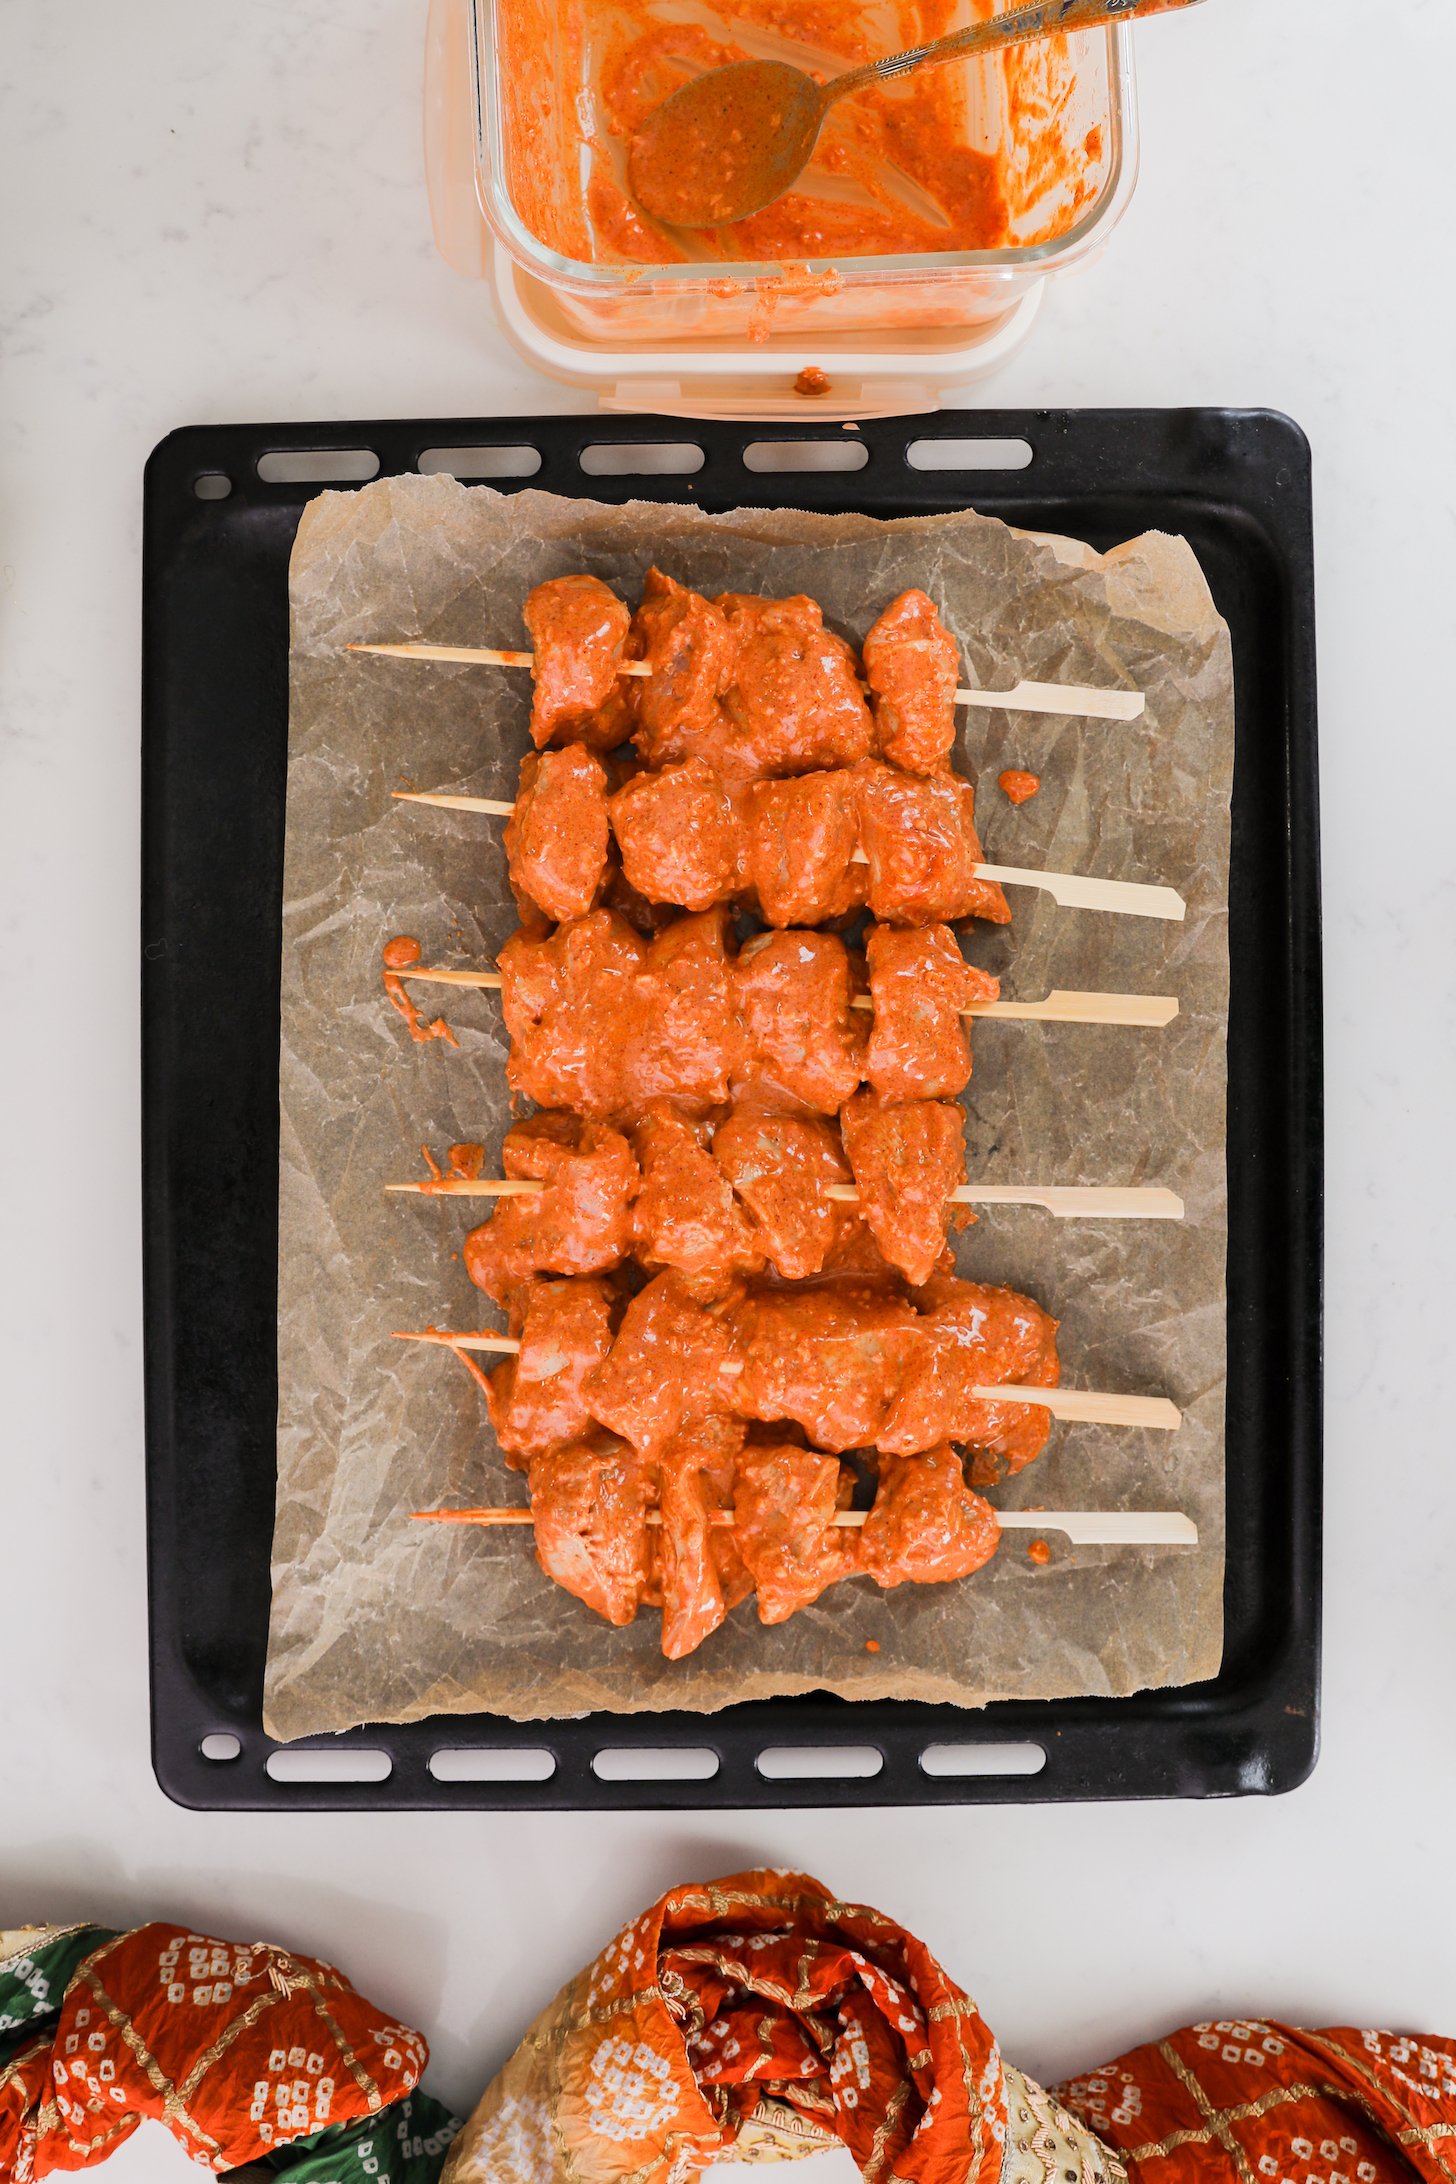 Skewers of orange-coloured chicken on a black tray,